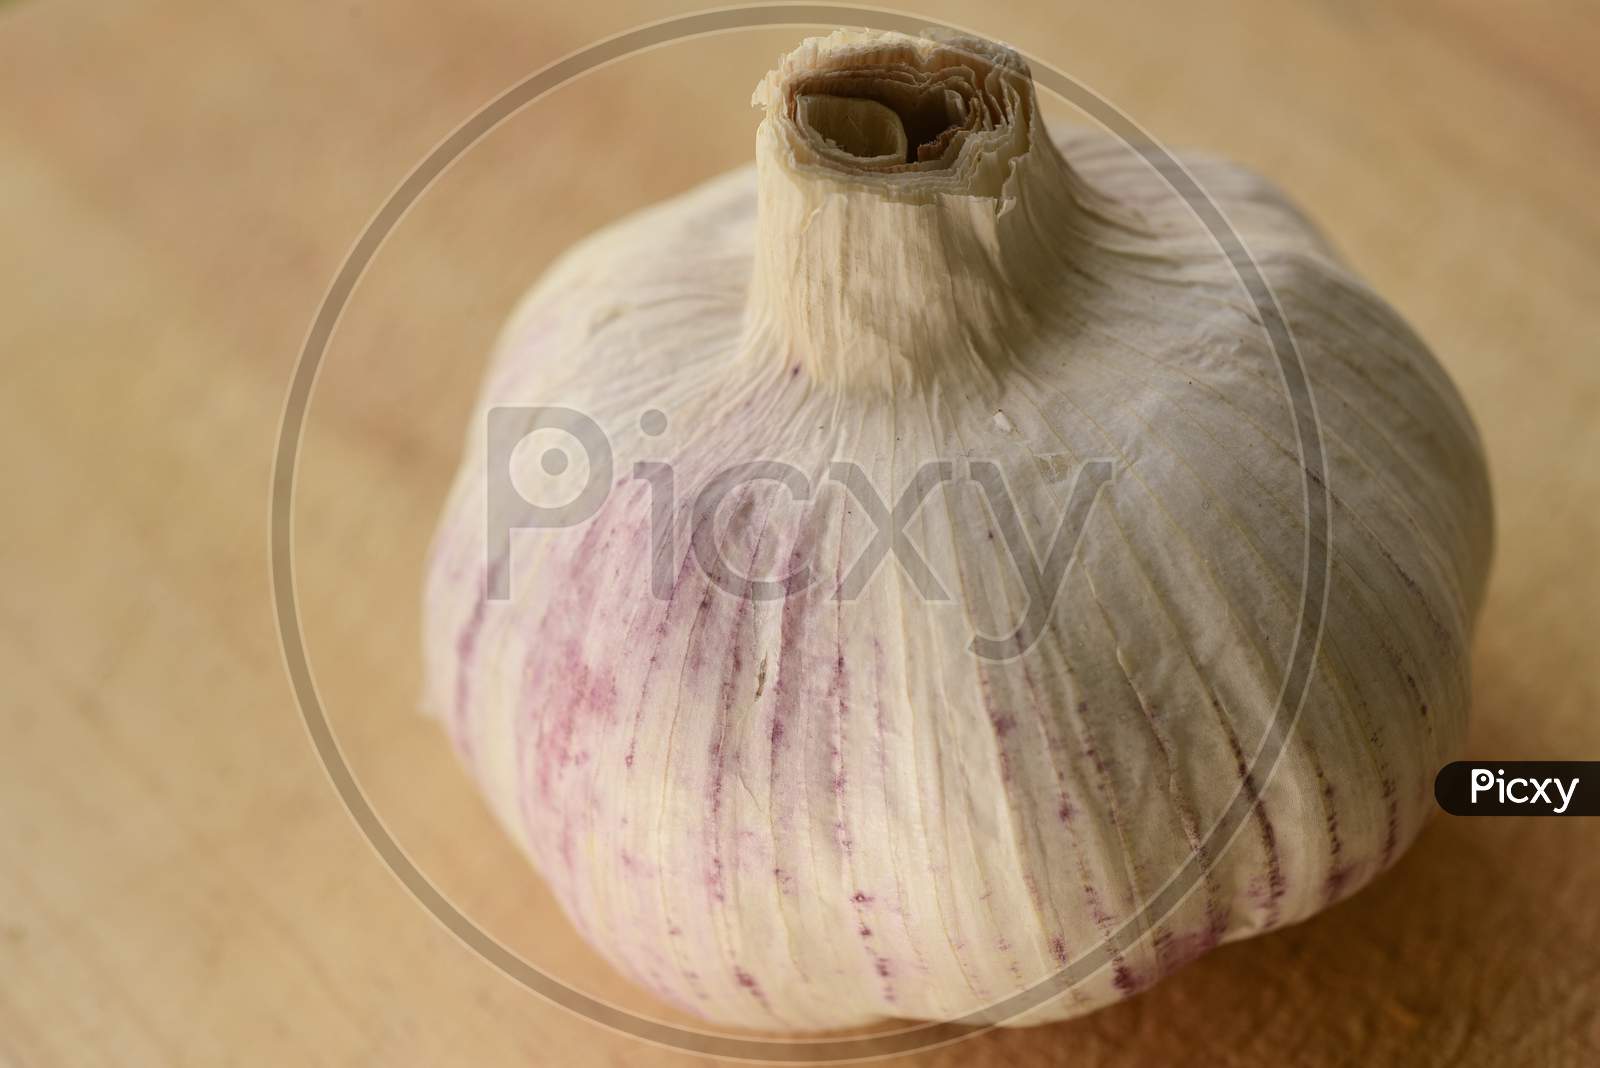 Nice Close Up Of Garlic On A Wooden Chopping Board